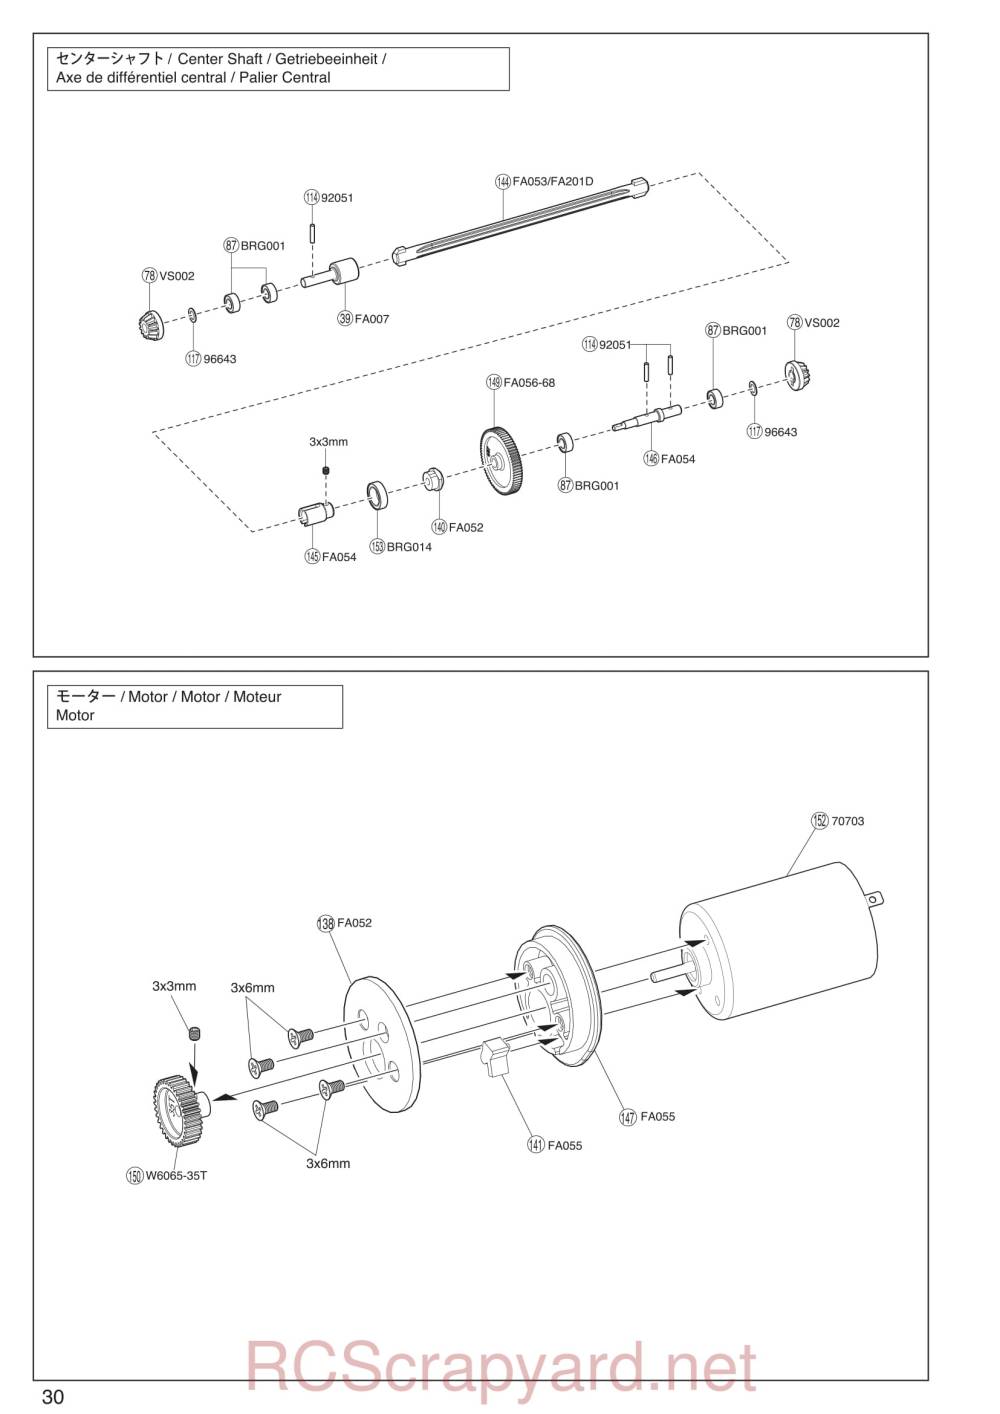 Kyosho EP Fazer Drift - 34061T1 - Exploded View - Page 4